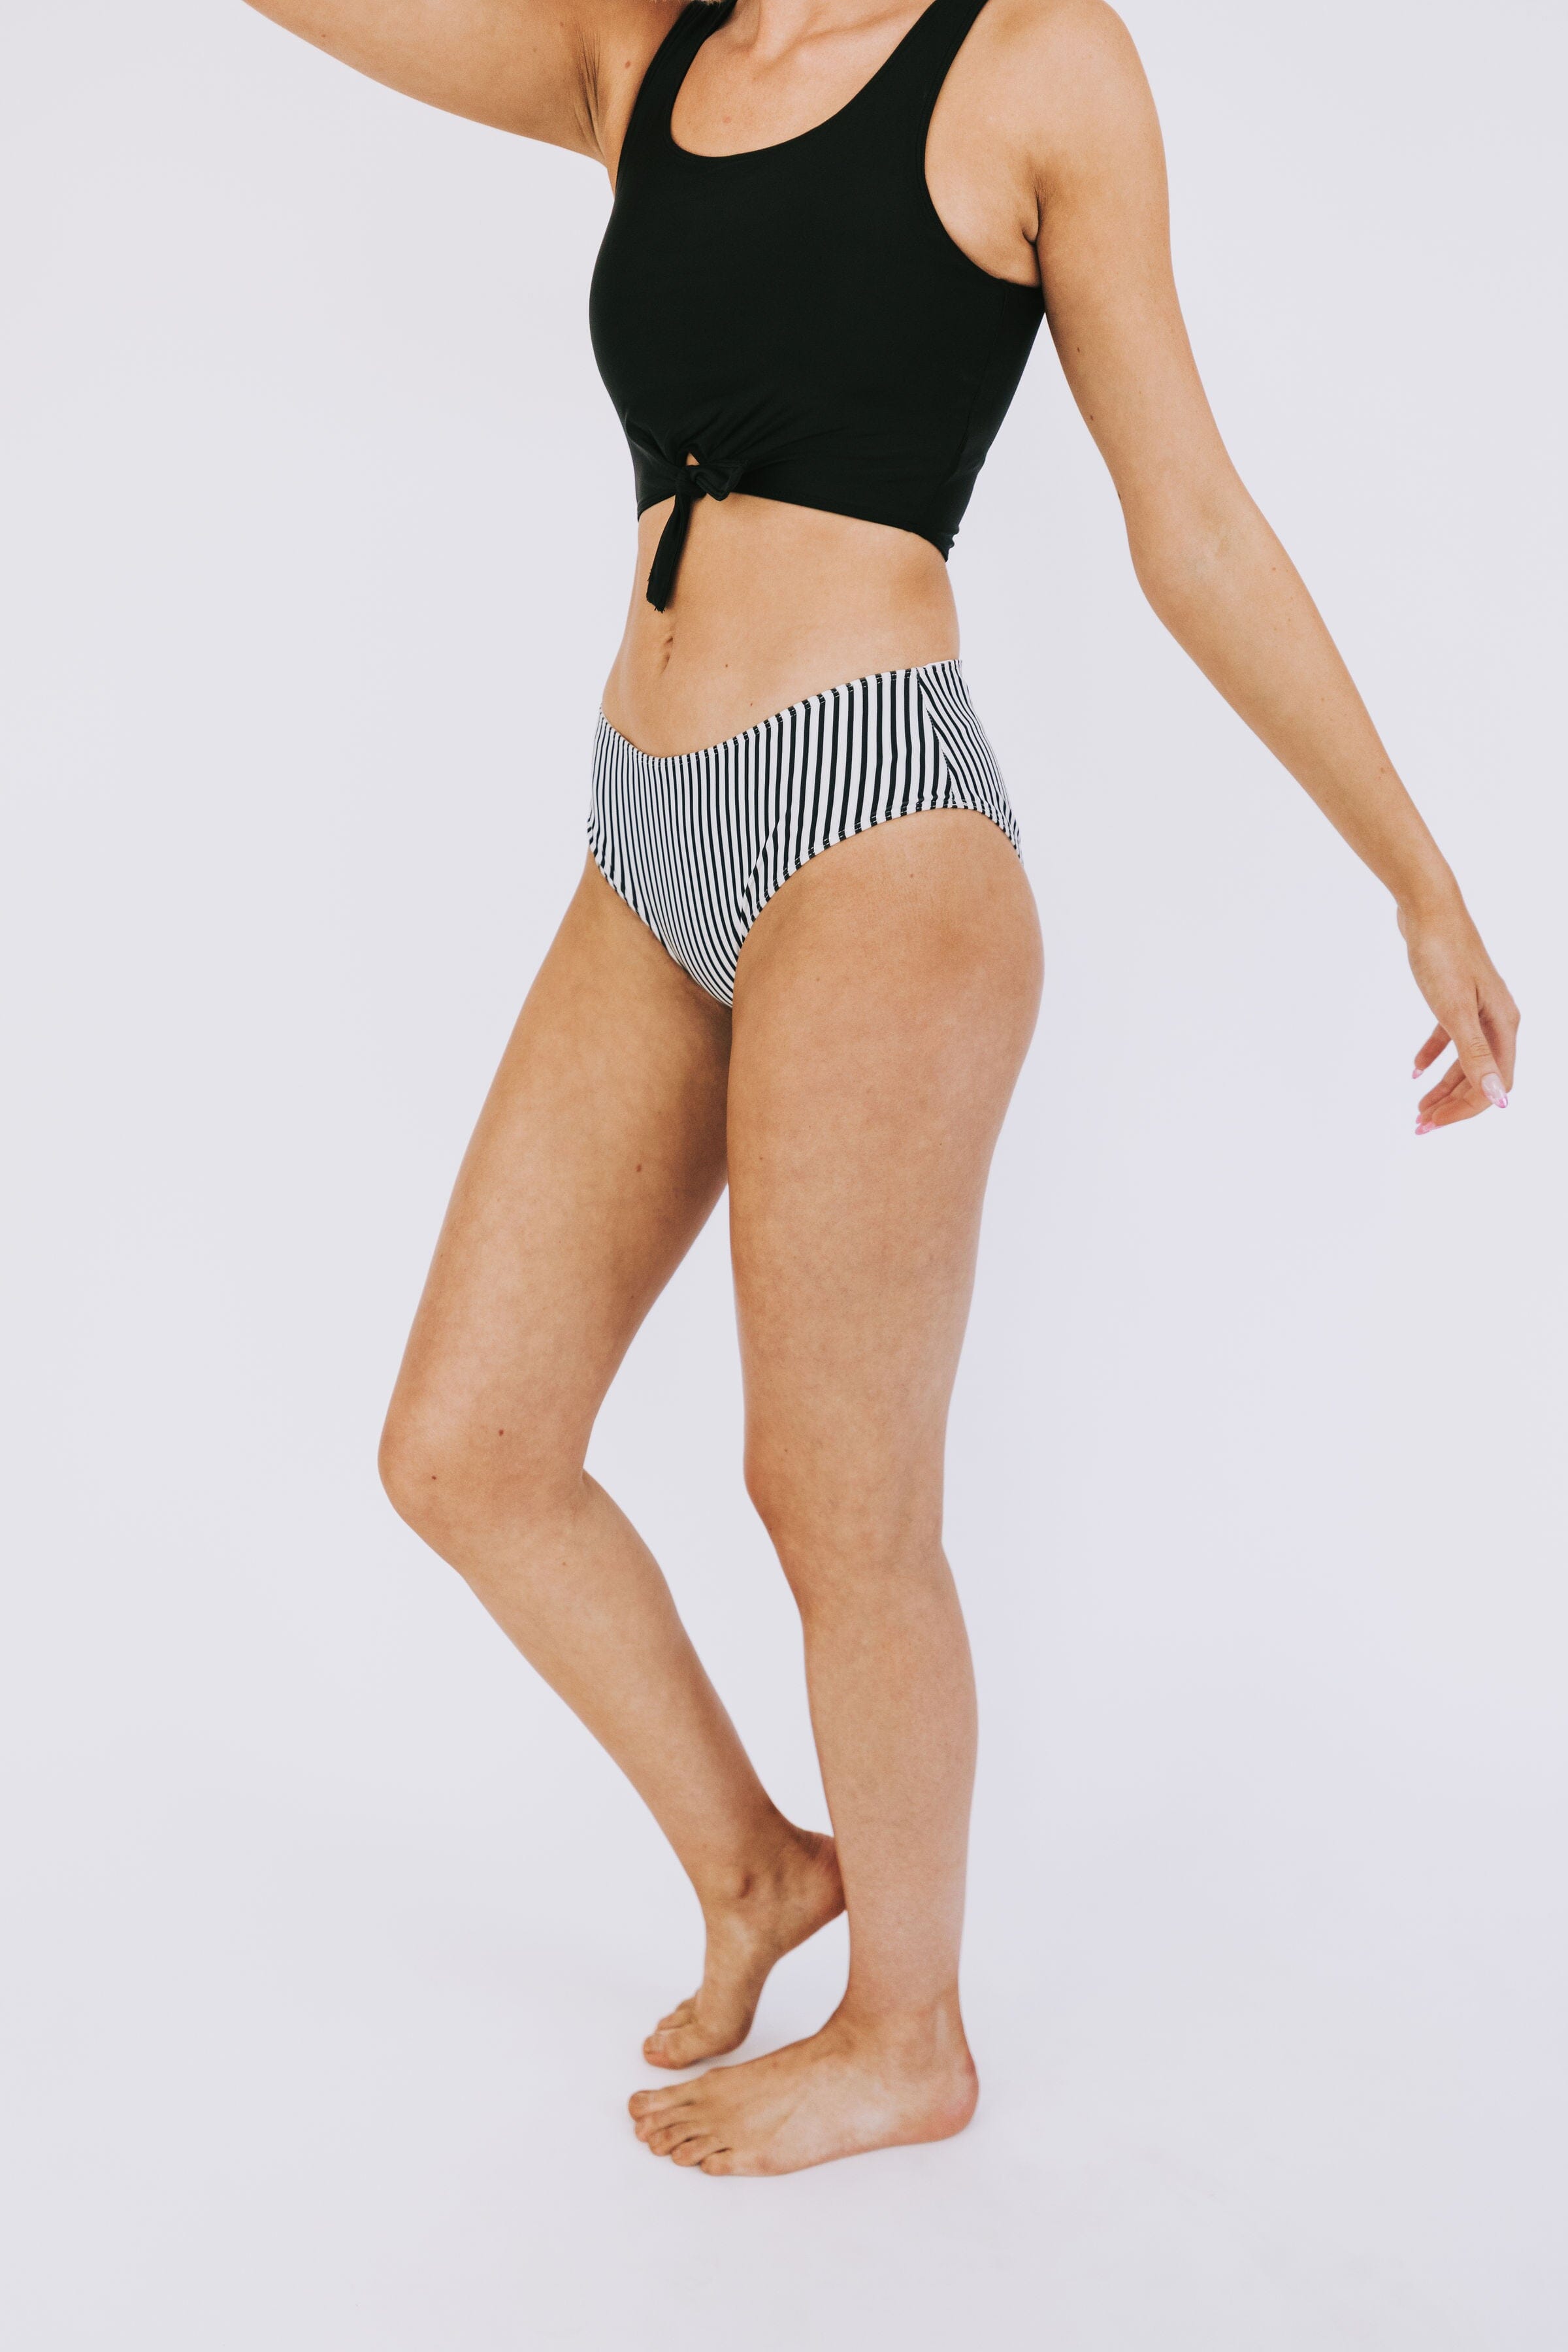 ONE LOVED BABE - Bahama Bottoms - 6 Colors